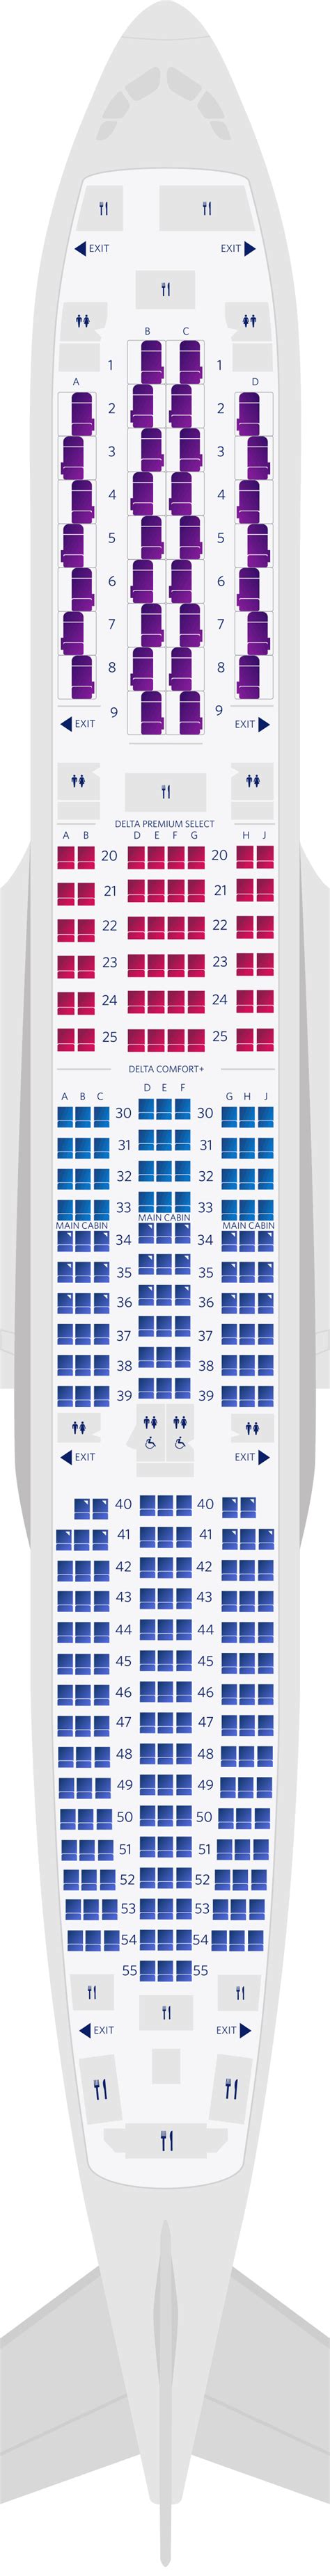 Delta Airbus 359 Seating Chart Hot Sex Picture